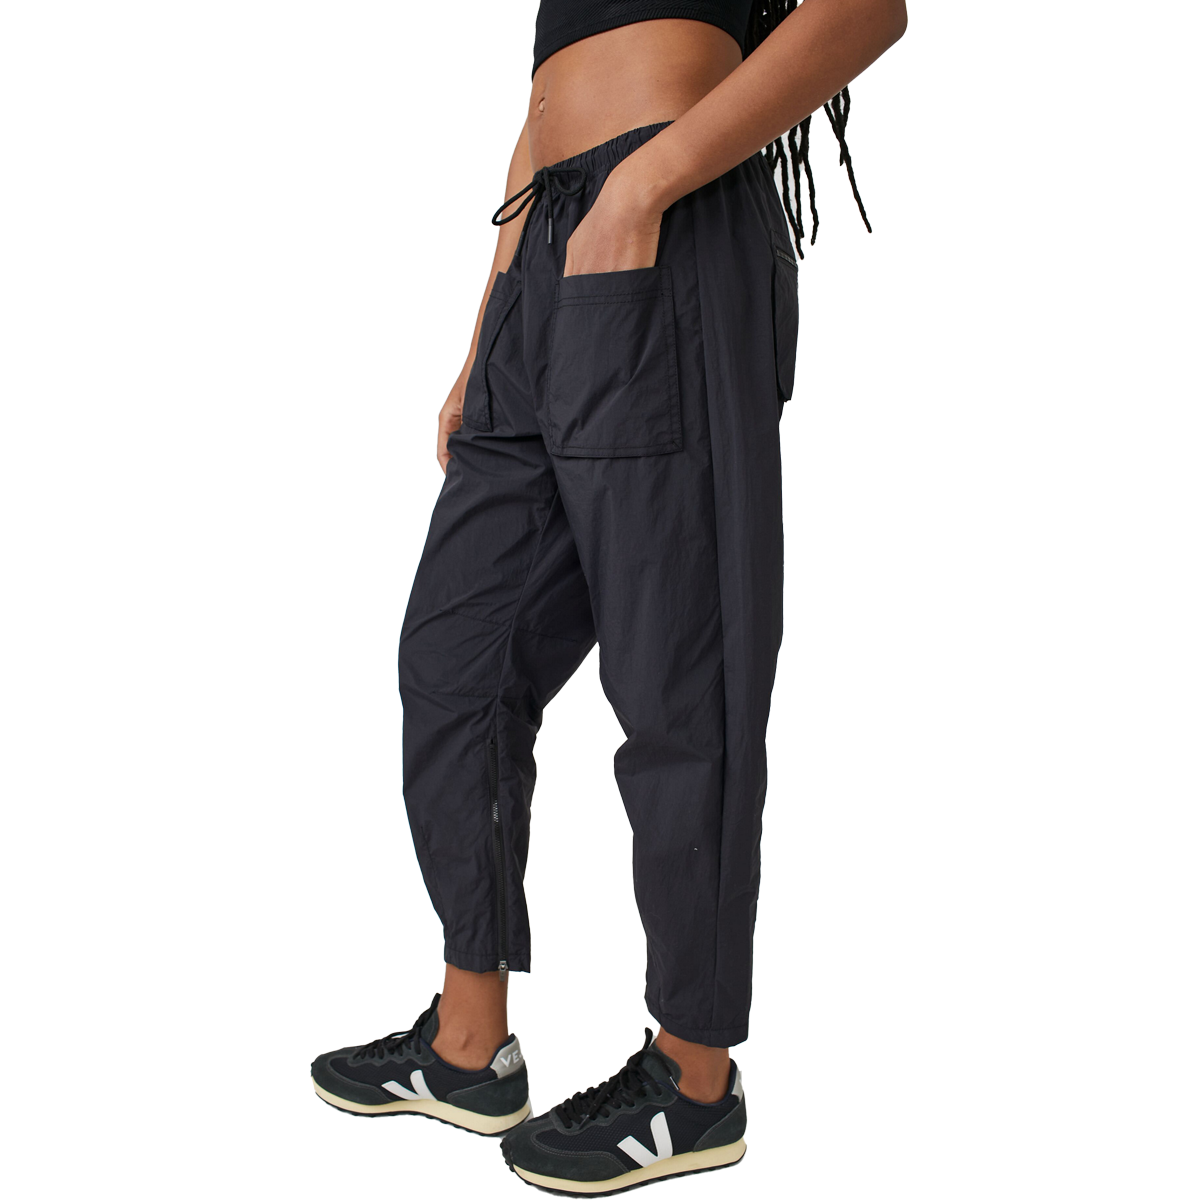 Women's Fly By Night Pant alternate view